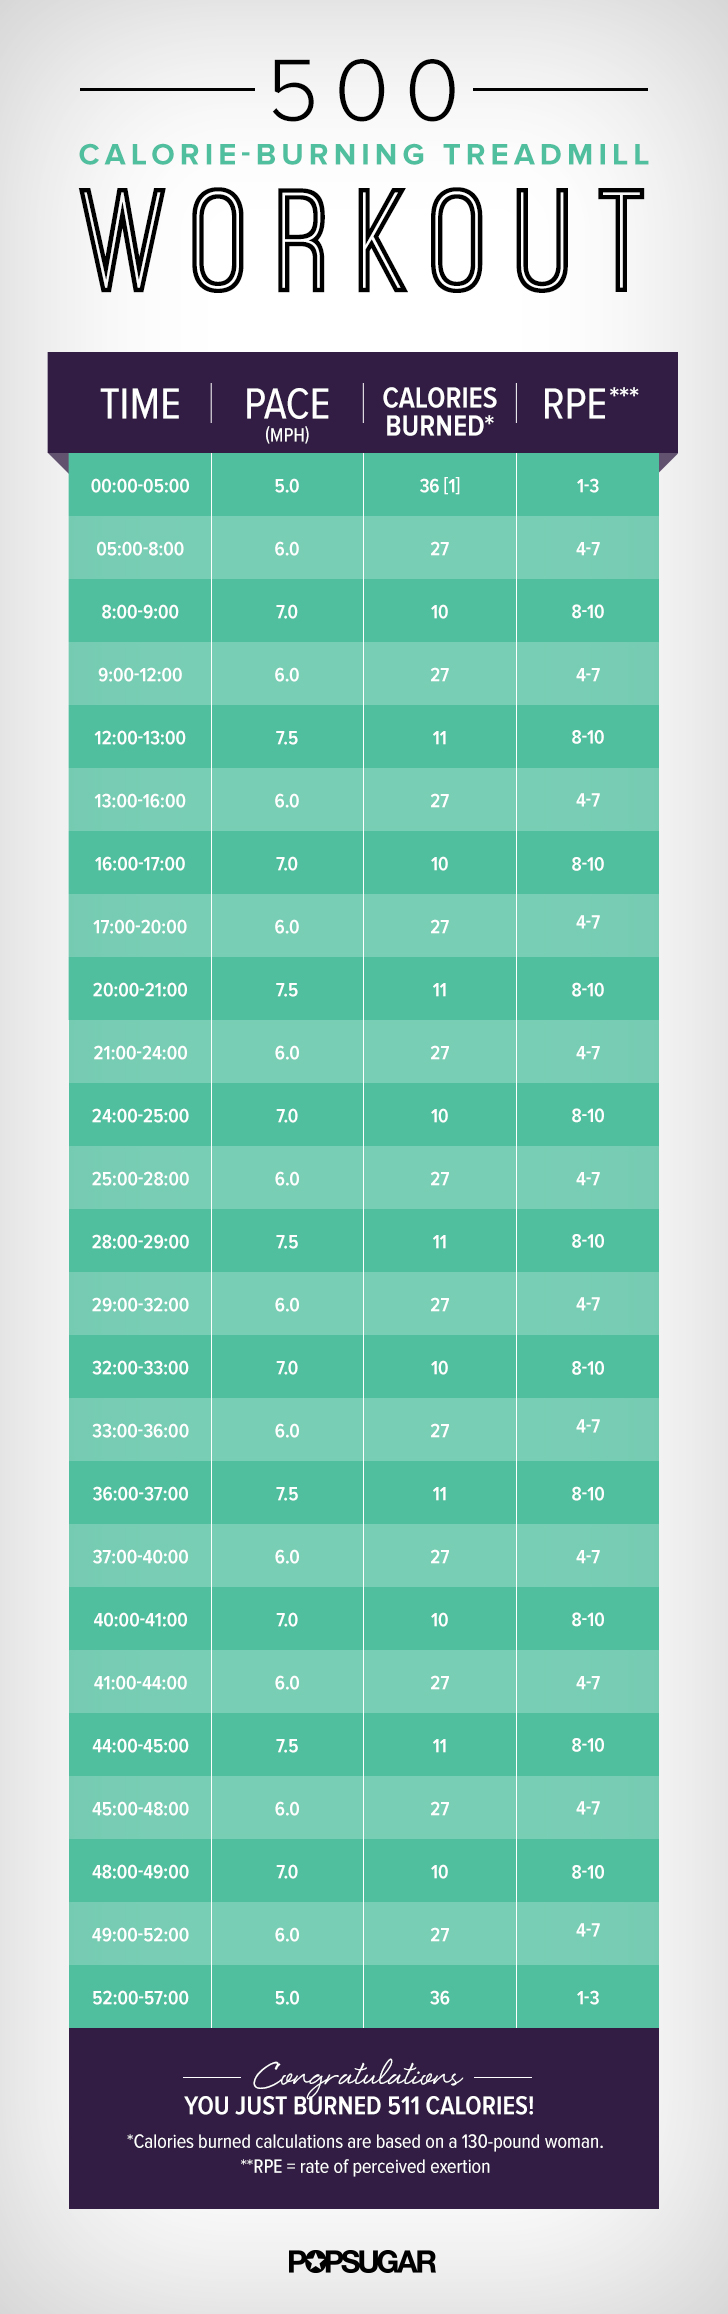 10 Minute 1000 calorie workout treadmill for Push Pull Legs